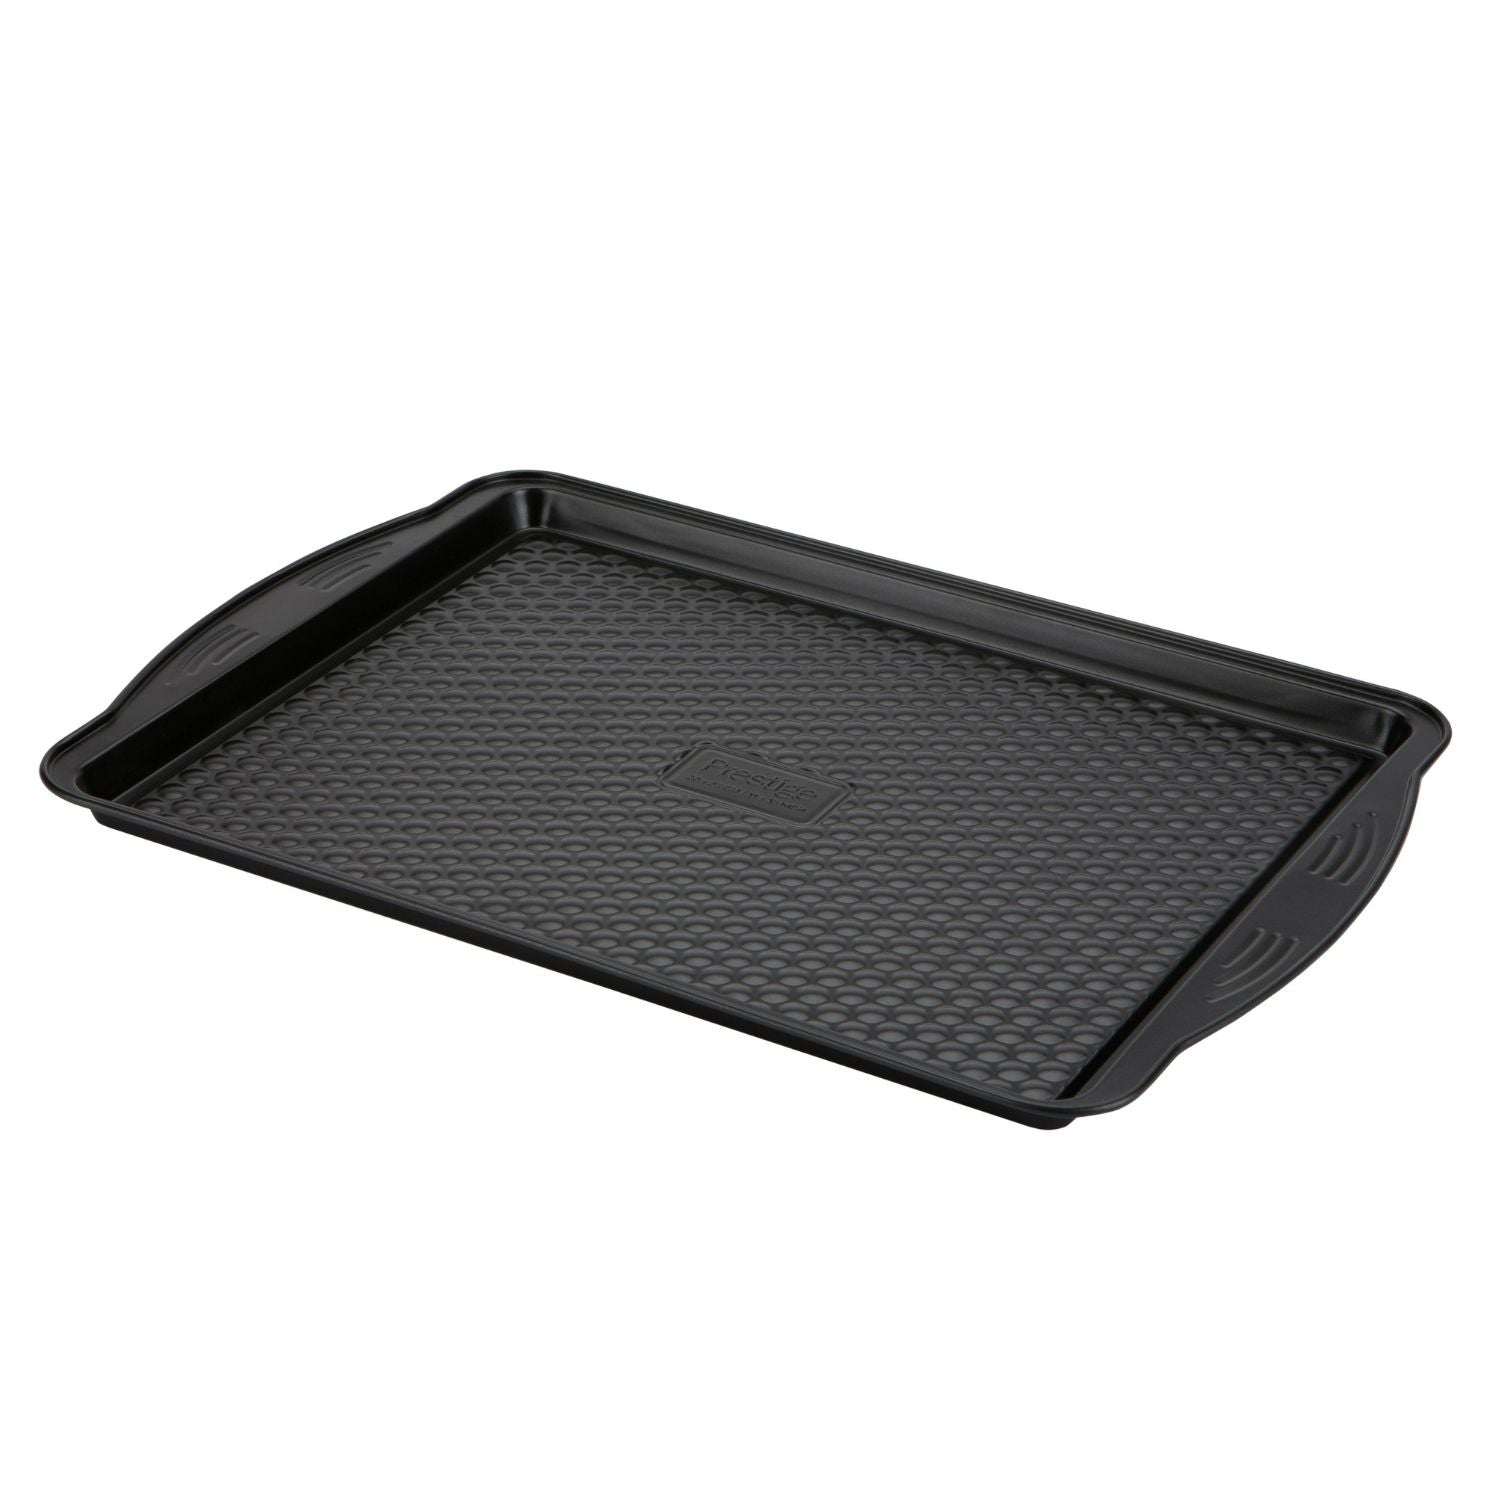 Meyers Bakeware Oven Tray - 11 X 15&